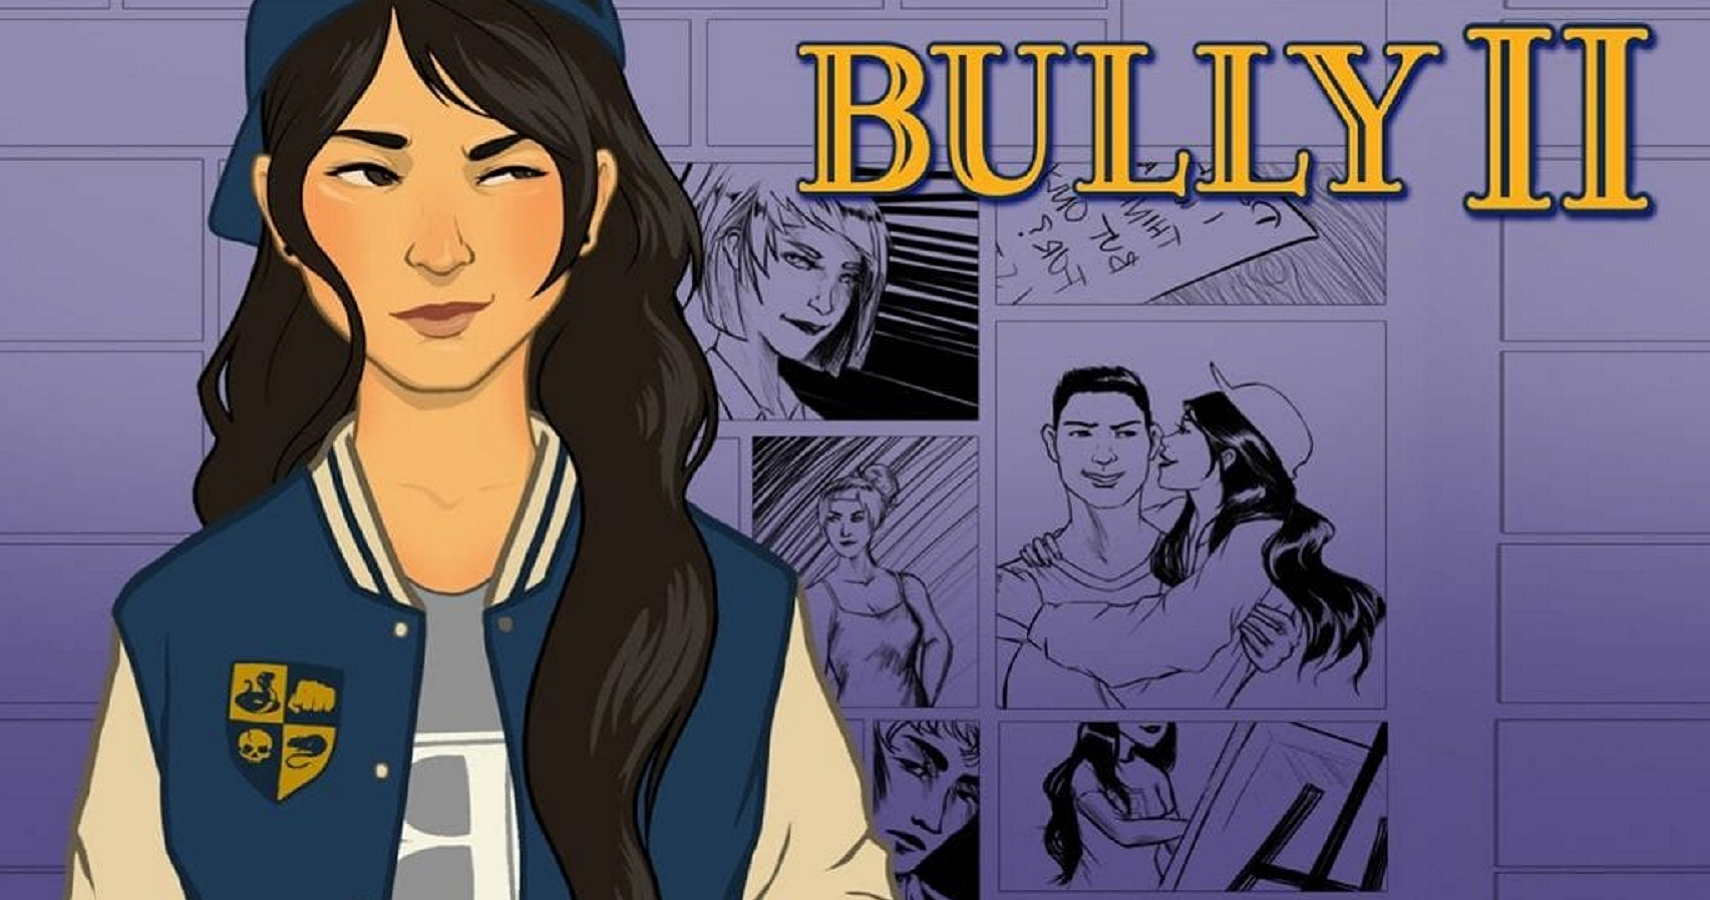 New Report With Rockstar Games Shares More Details On Bully 2